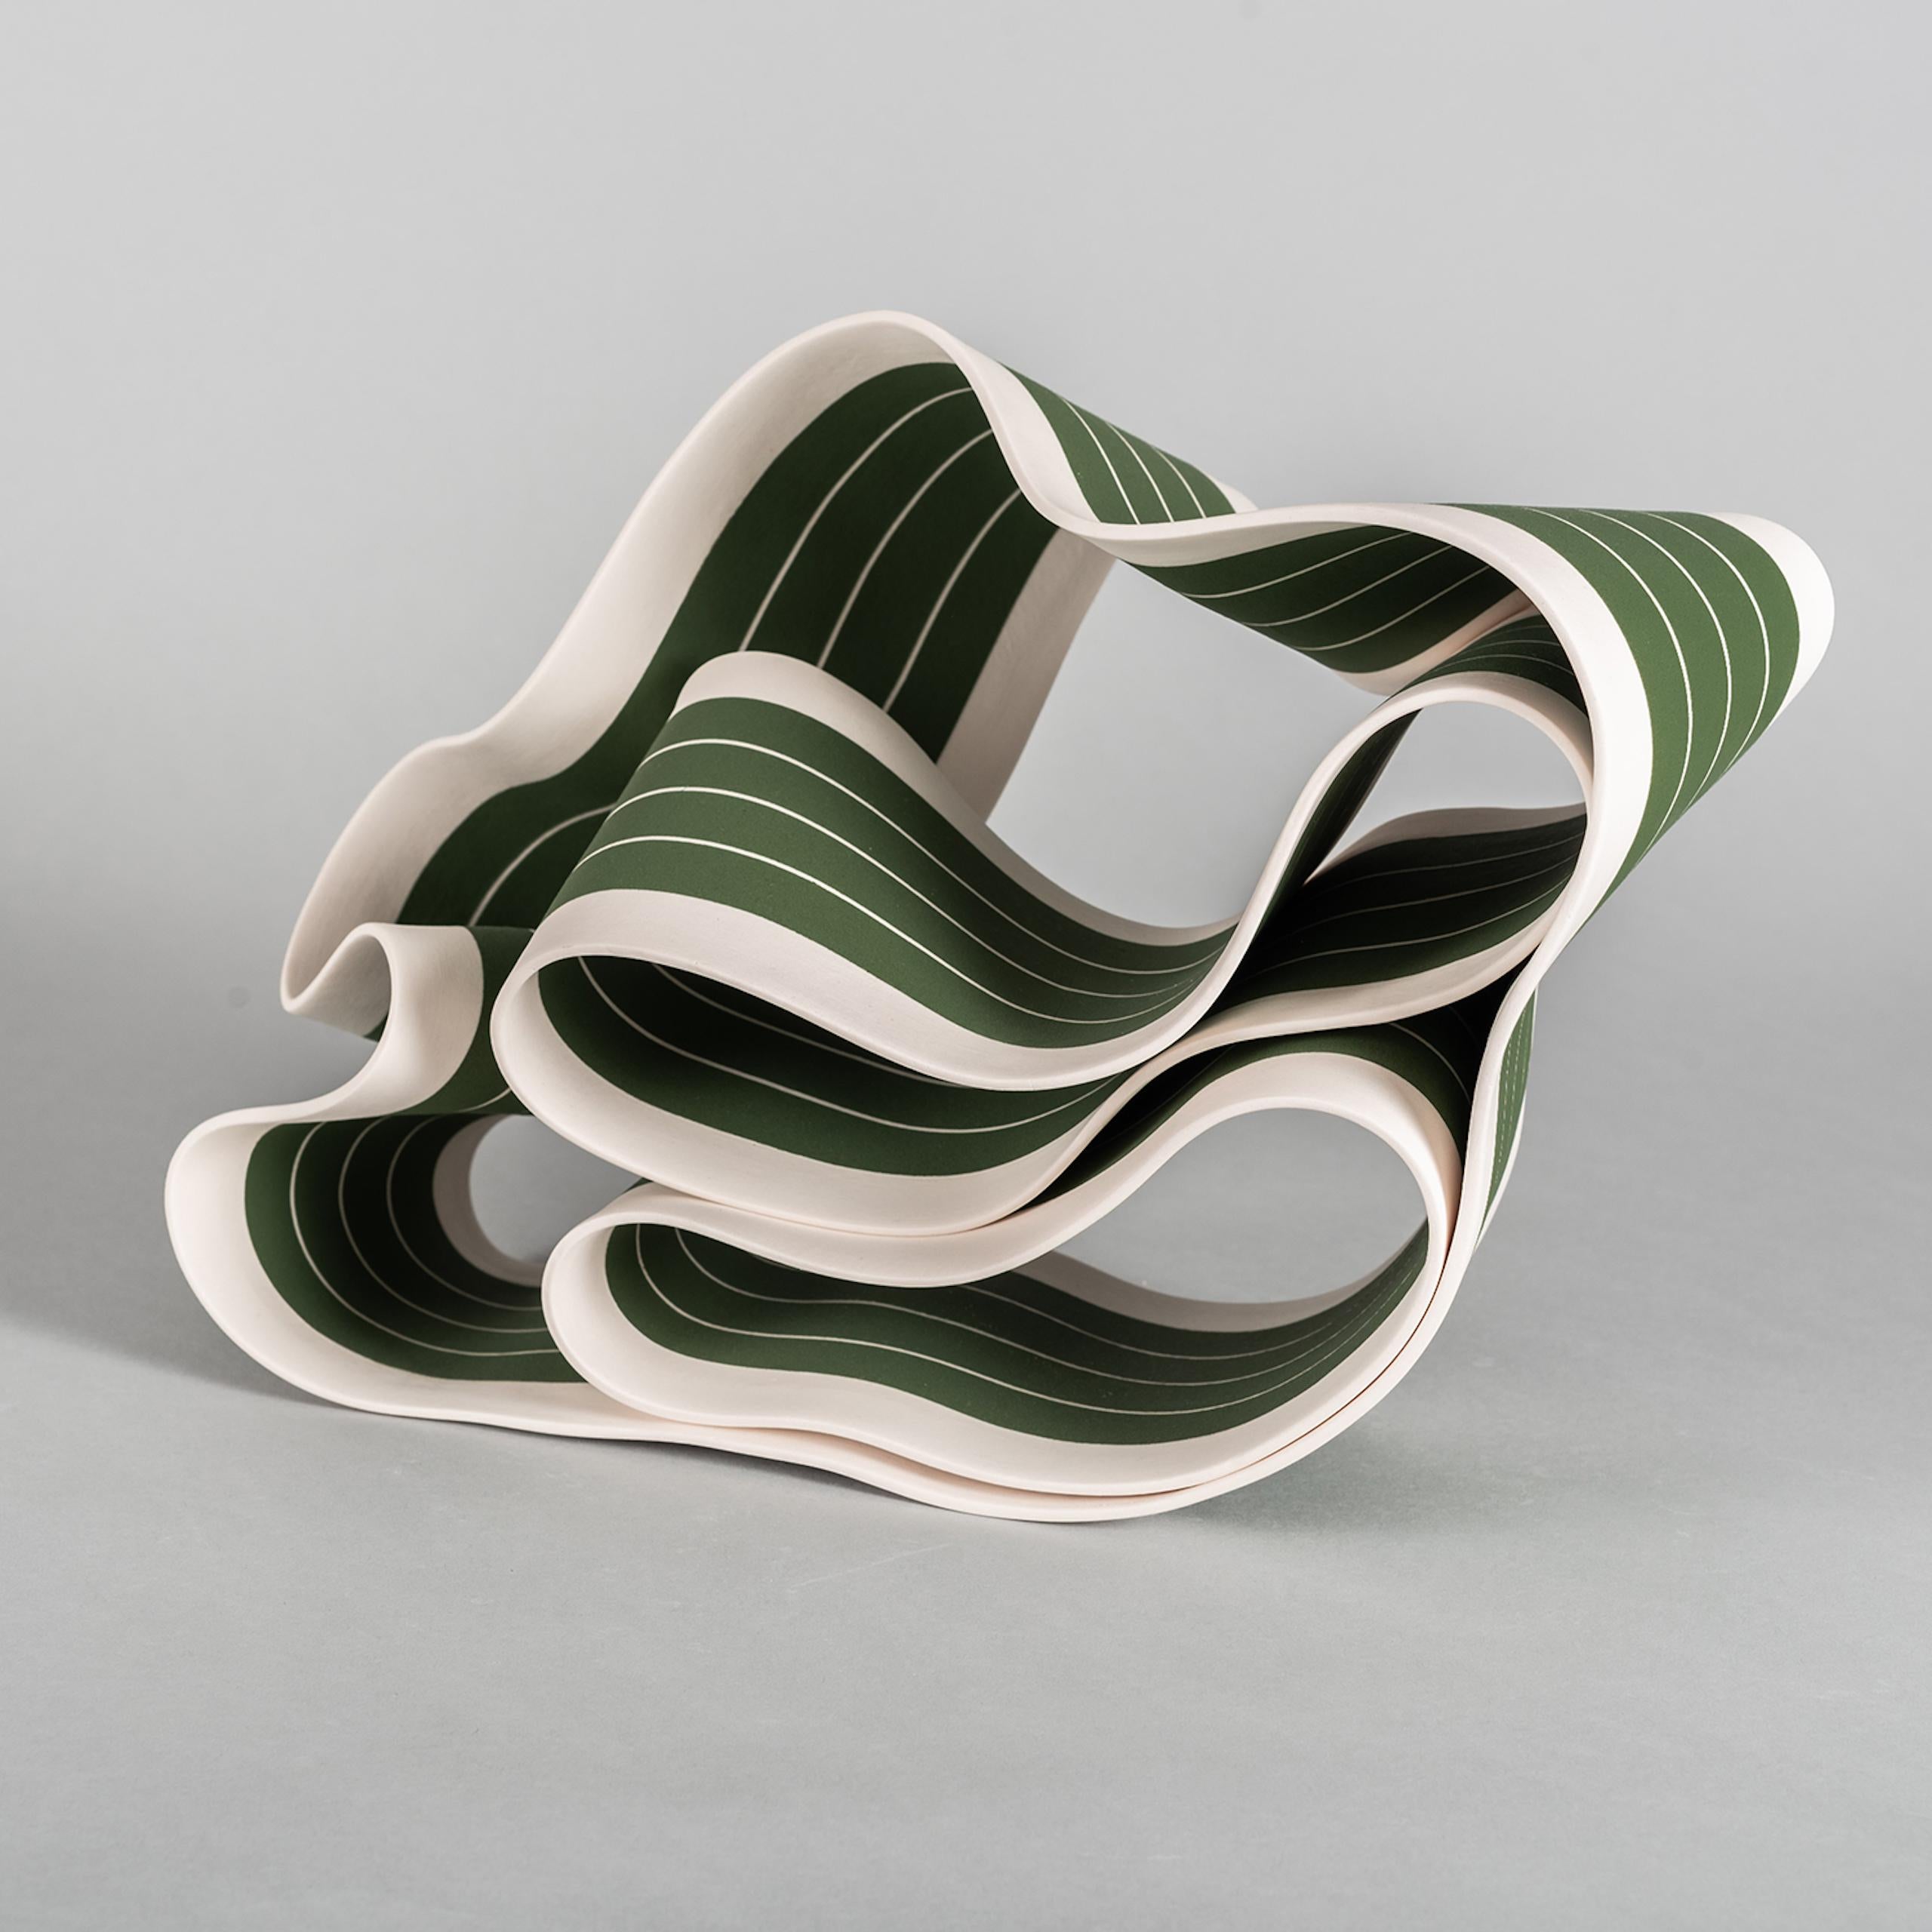 Folding in Motion 4 is a unique paper porcelain sculpture by contemporary artist Simcha Even-Chen, dimensions are 22 × 30 × 19 cm (8.7 × 11.8 × 7.5 in). The sculpture is signed and comes with a certificate of authenticity.

This sculpture is a part